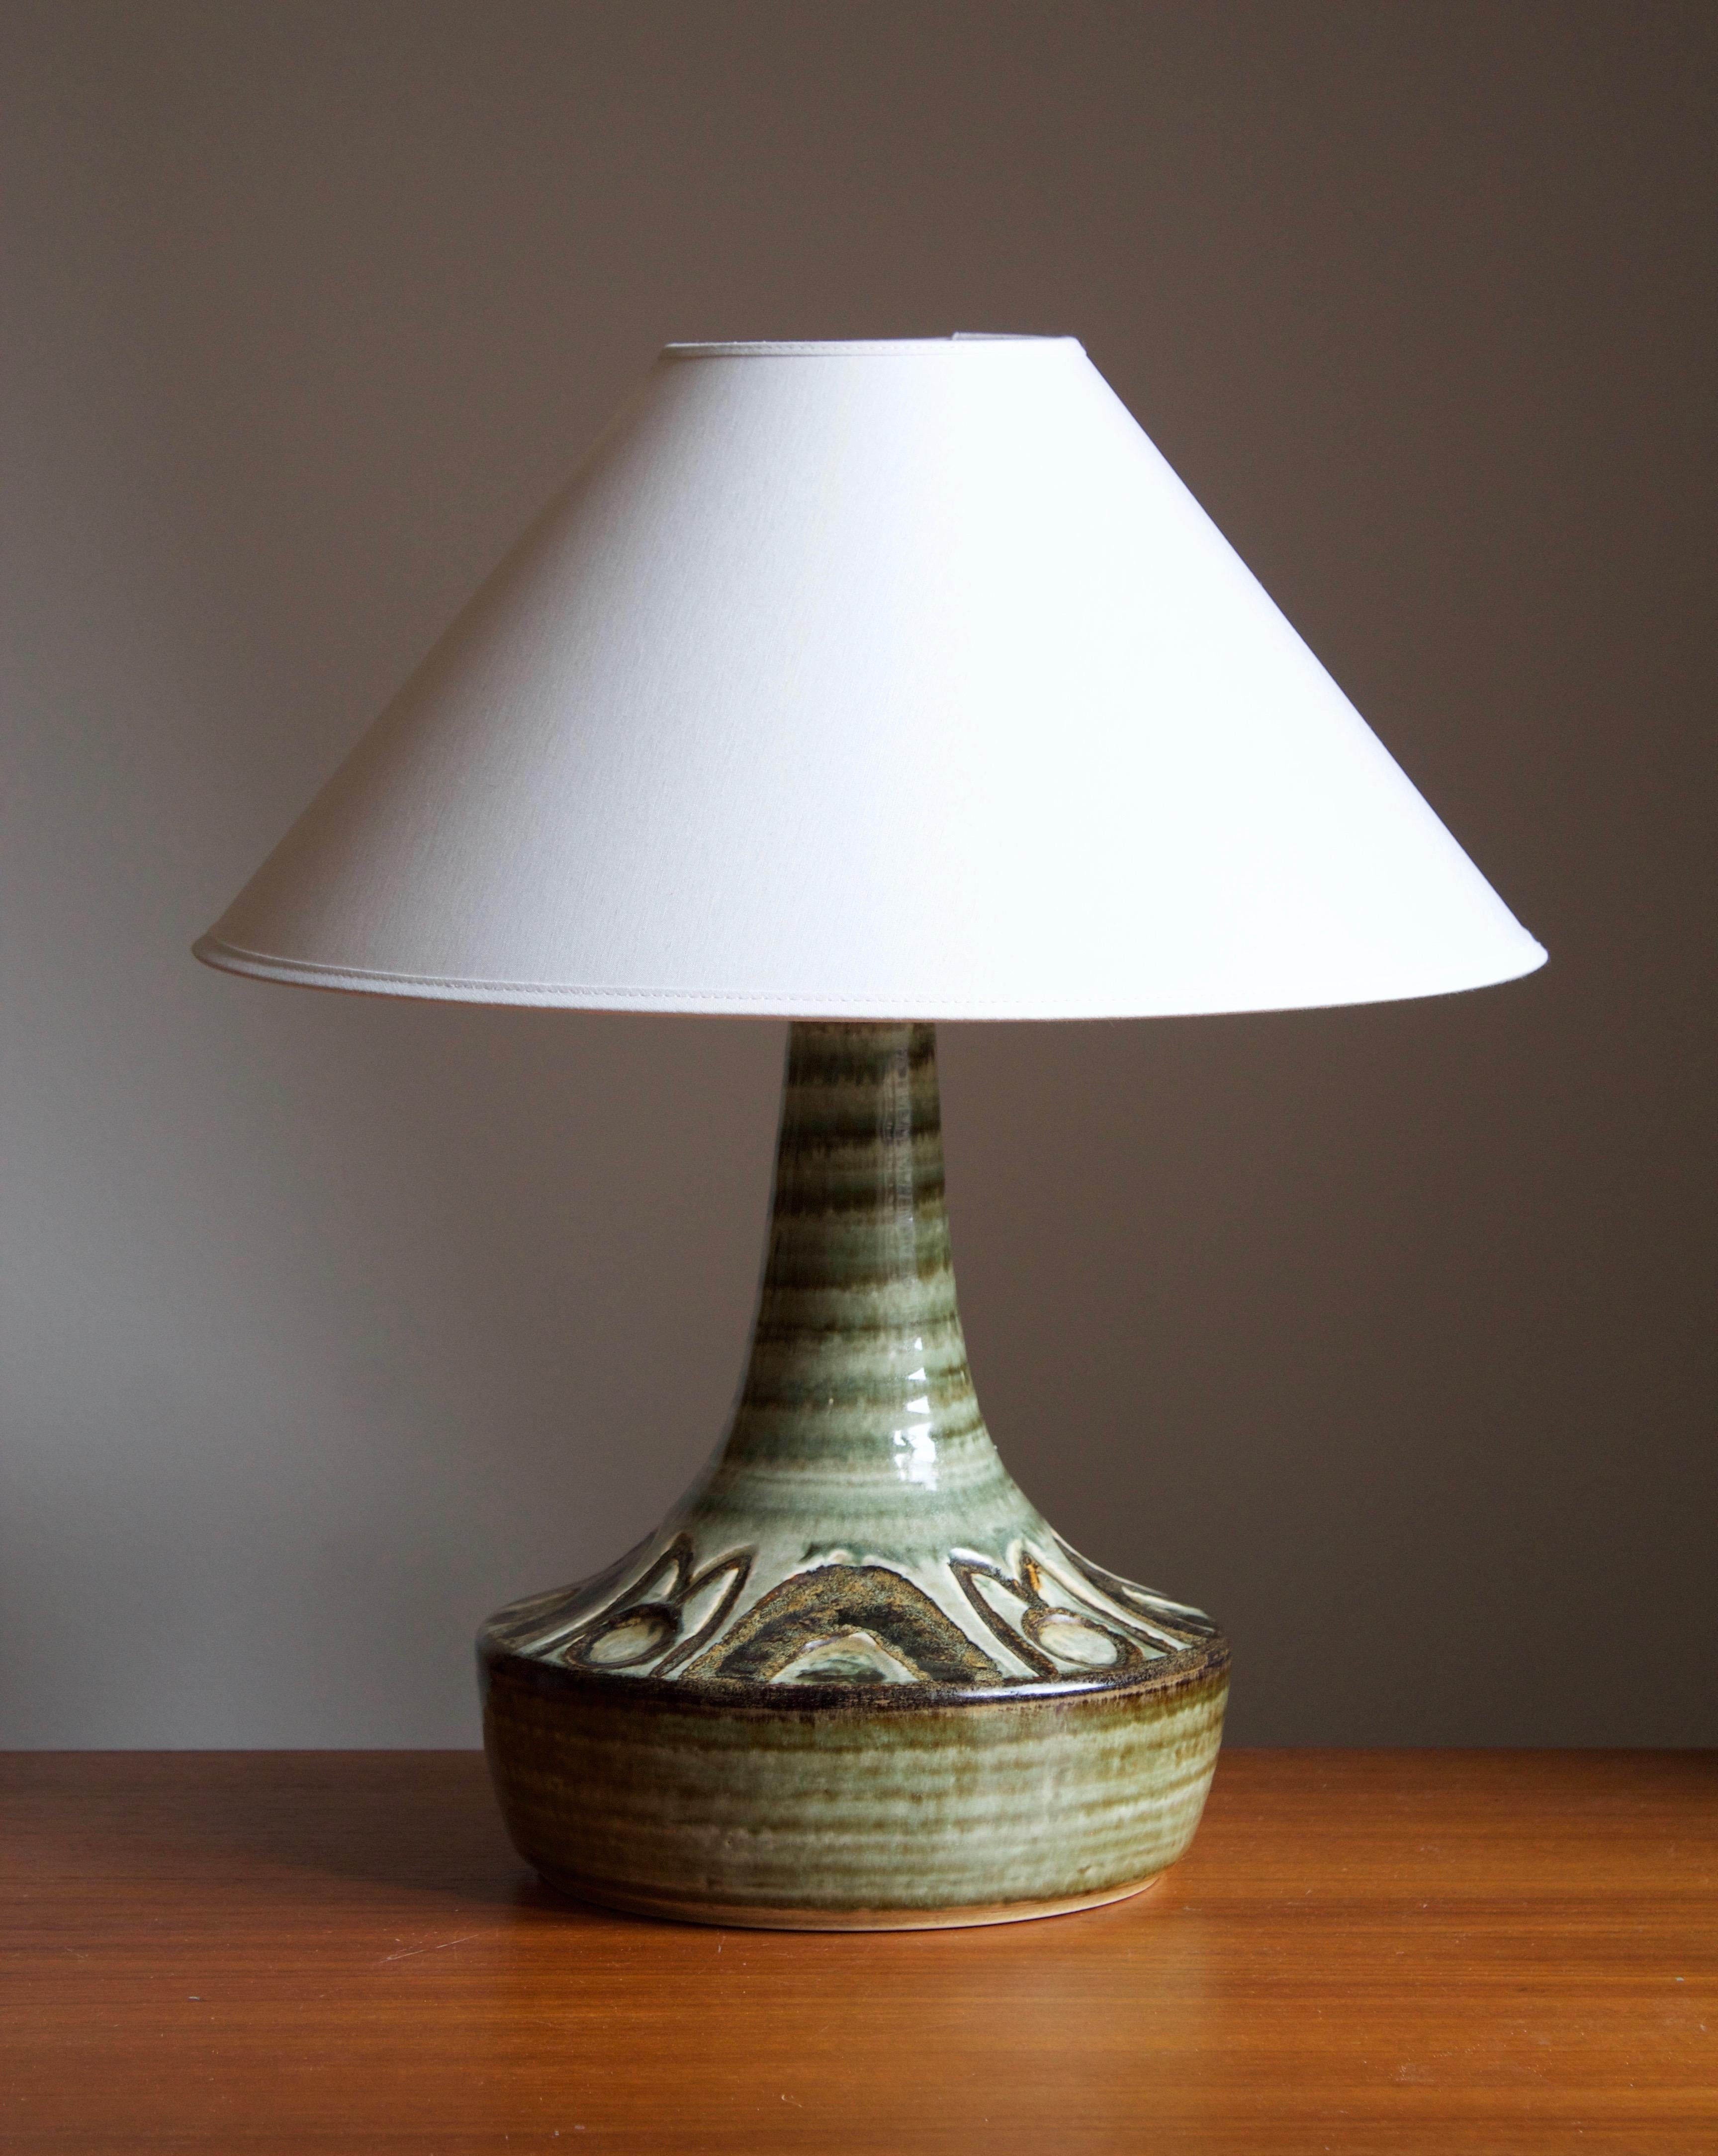 A table lamp produced by Søholm Keramik, located on the island of Bornholm in Denmark. Features a highly artistic glazed and incised decor.

Sold without lampshade. Stated dimensions exclude the lampshade.

Glaze features brown-green colors.

Other